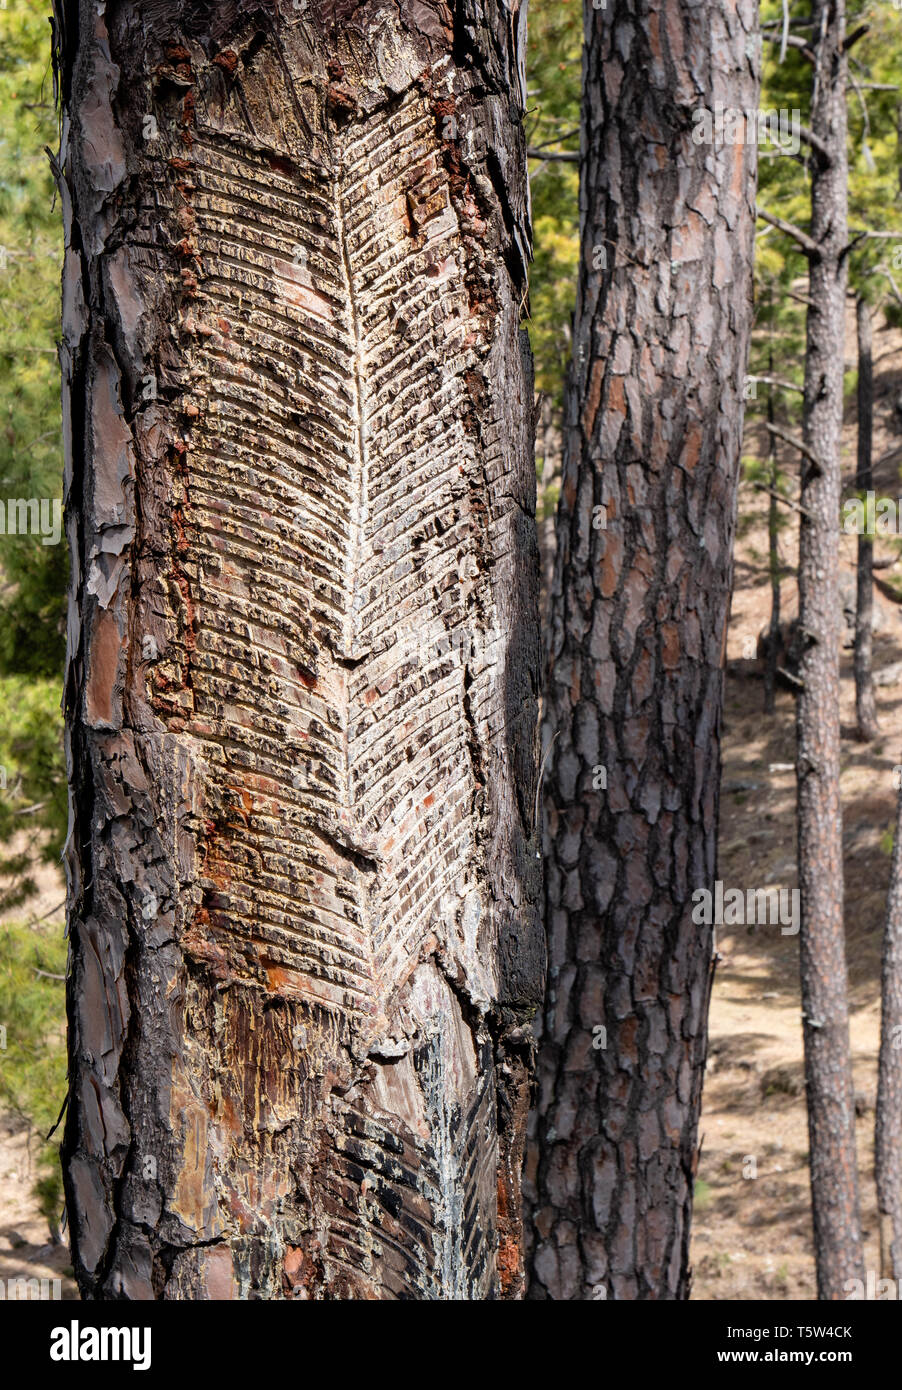 Trunk of Himalayan chir or long leaf Indian pine Pinus roxburghii scored  to tap for resin to make turpentine or rosin- Uttarakhand India Stock Photo